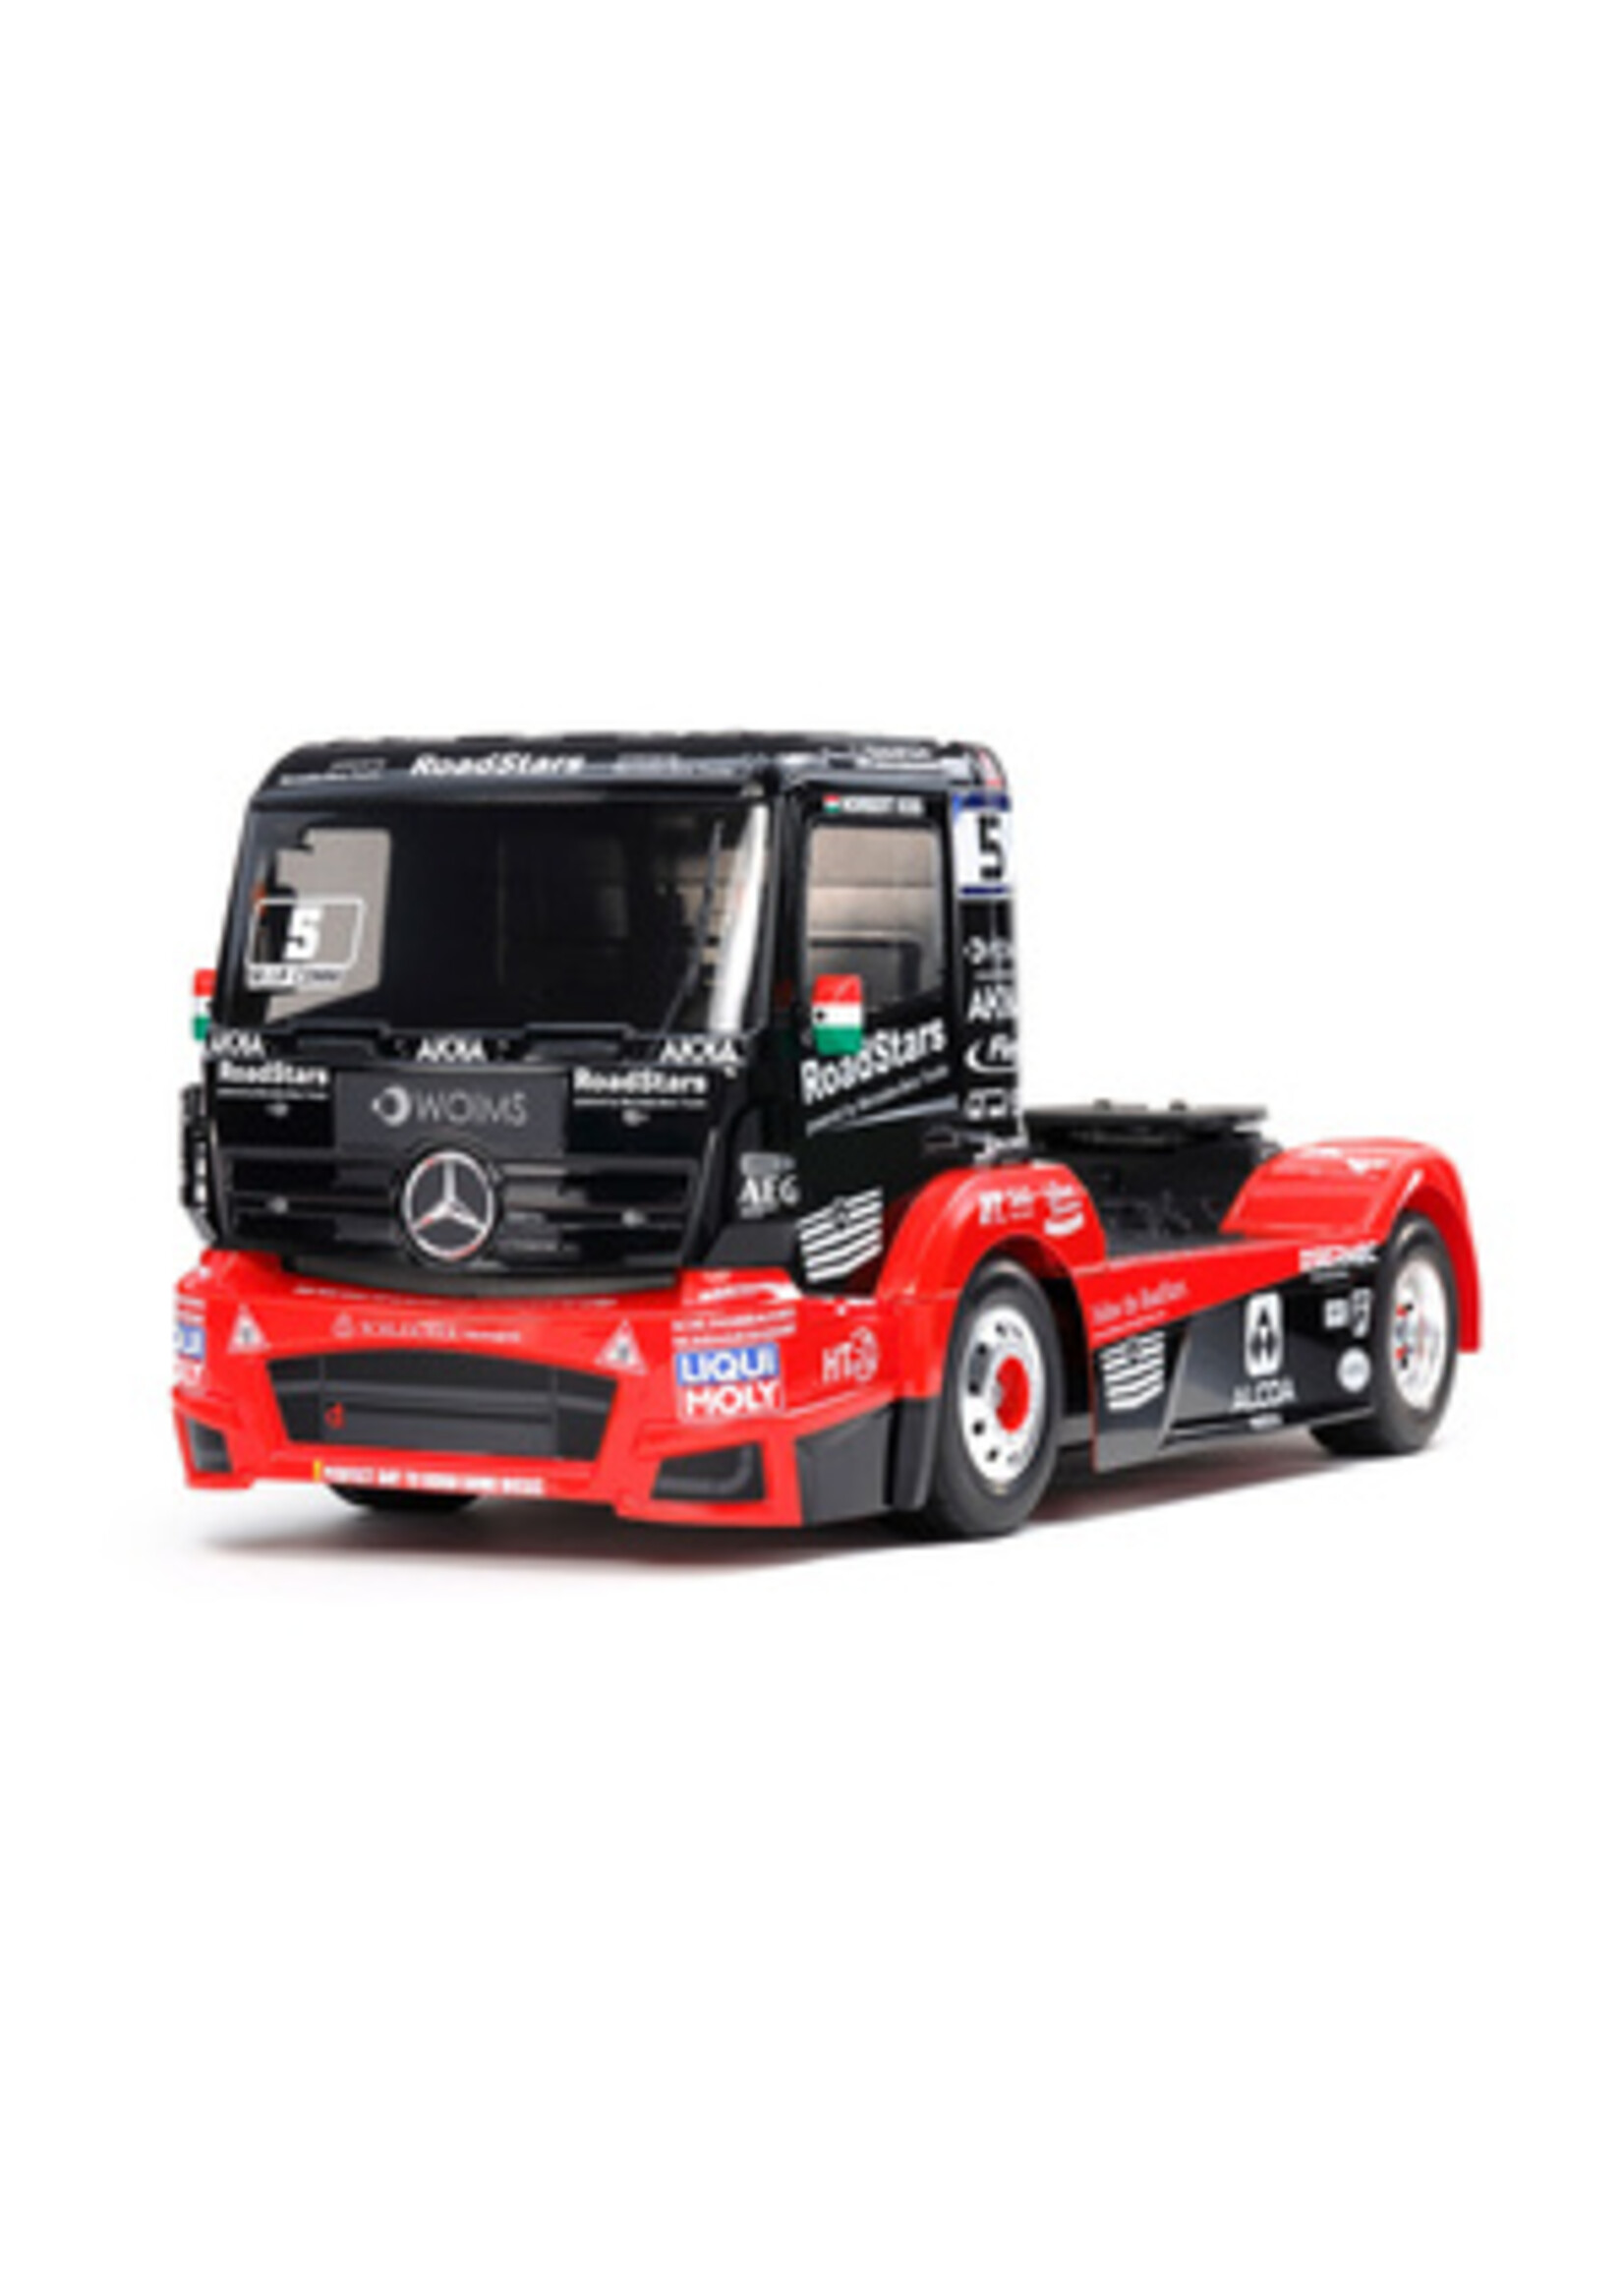 Tamiya TAM58683-A Tamiya 1/14 RC Mercedes-Benz Race Truck Actros MP4, TT-01 Type E Chassis